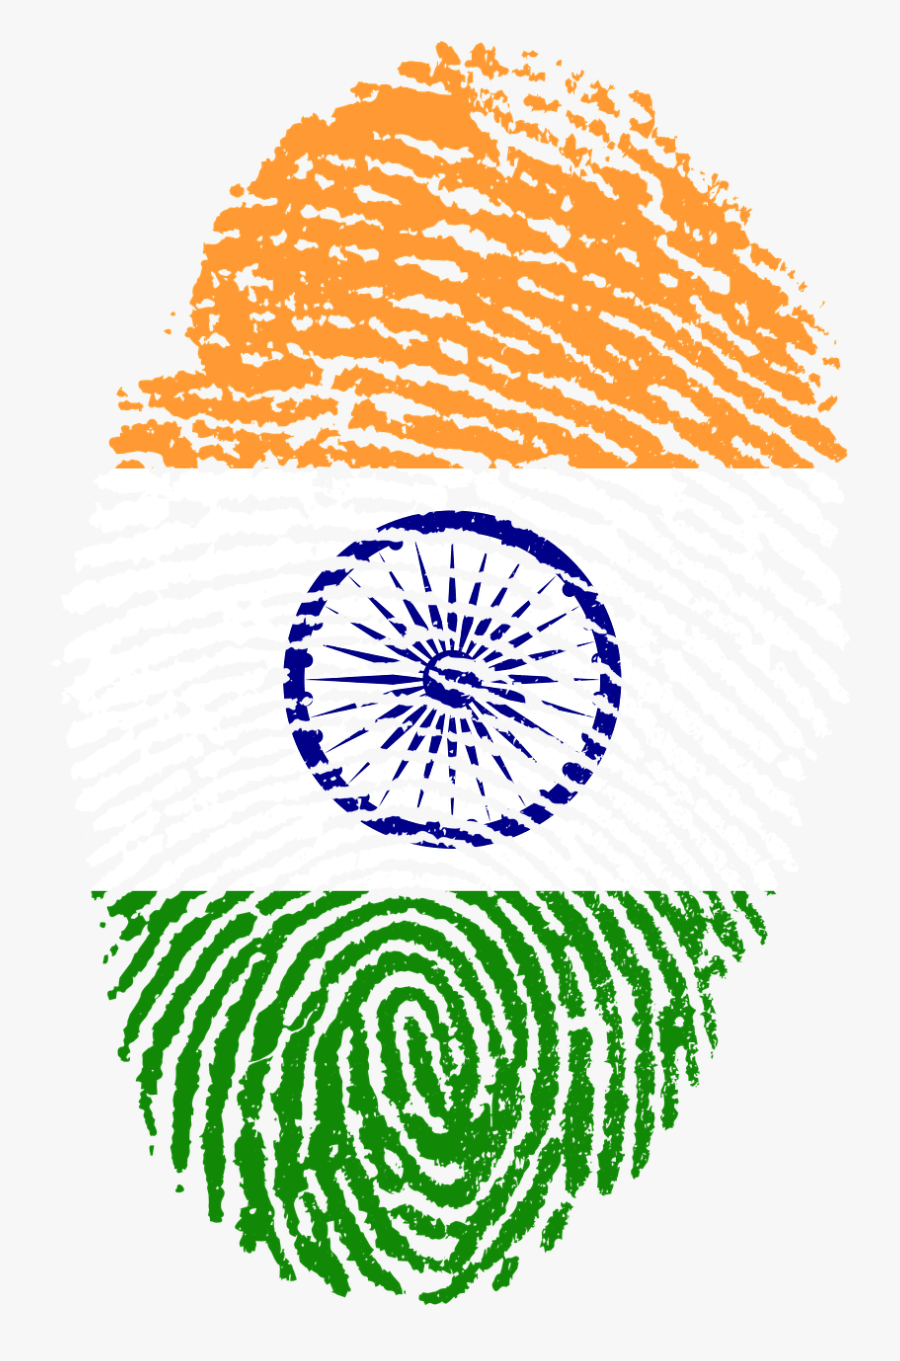 Indian Tricolour Art Png - Challenges Of Digital India, Transparent Clipart